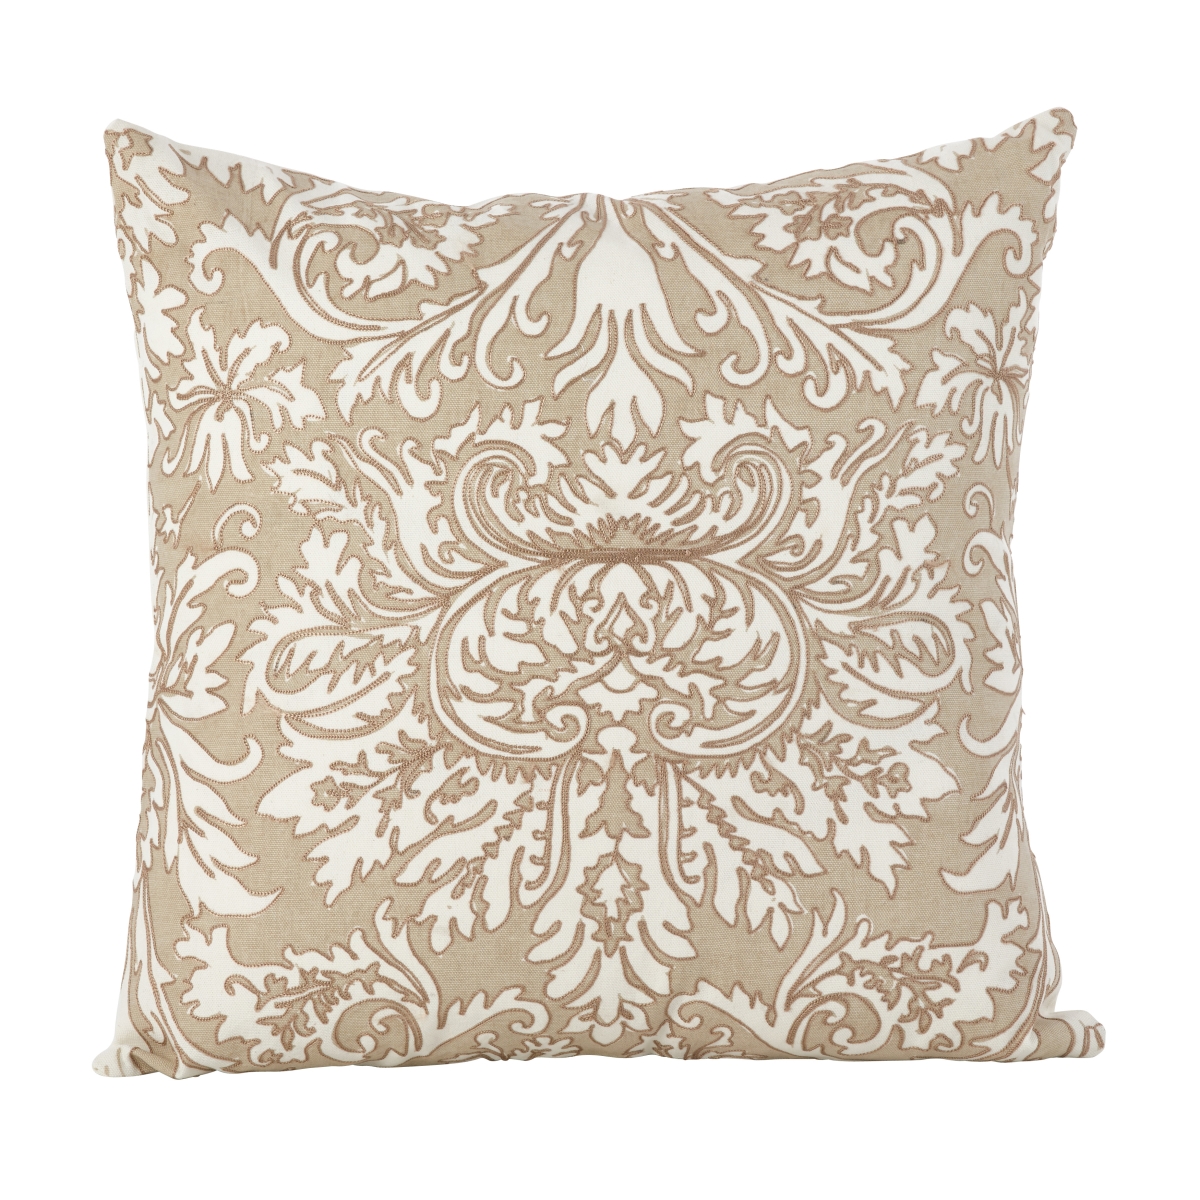 0005.gy18s 18 In. Stitched Medallion Motif Cotton Down Filled Throw Pillow, Grey